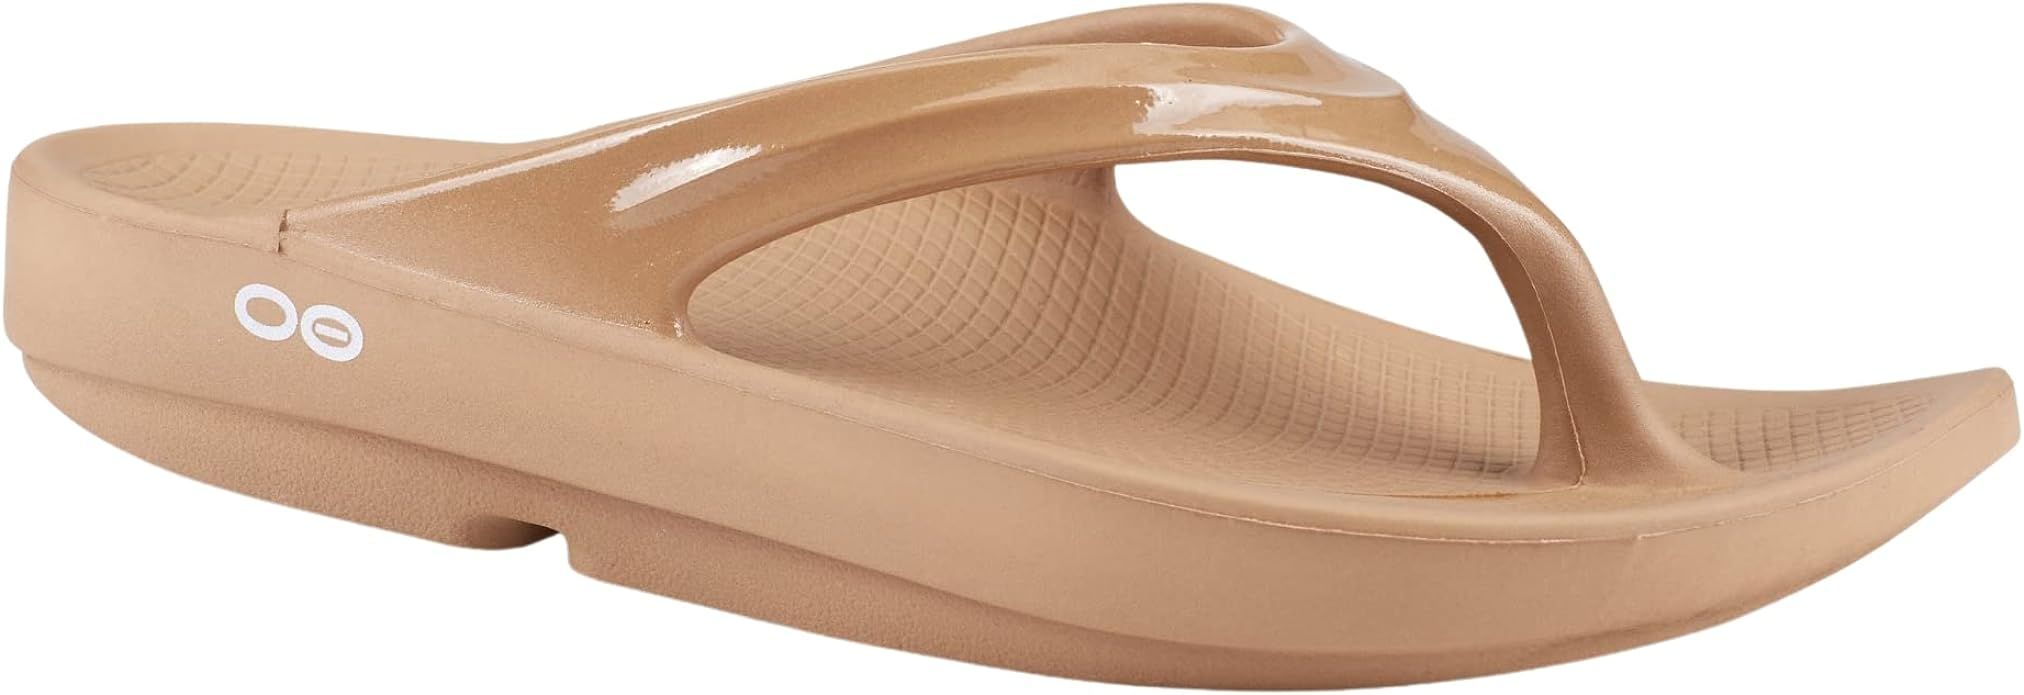 OOFOS OOlala Sandal, Taupe - Women’s Size 9 - Lightweight Recovery Footwear - Reduces Impact on... | Amazon (US)